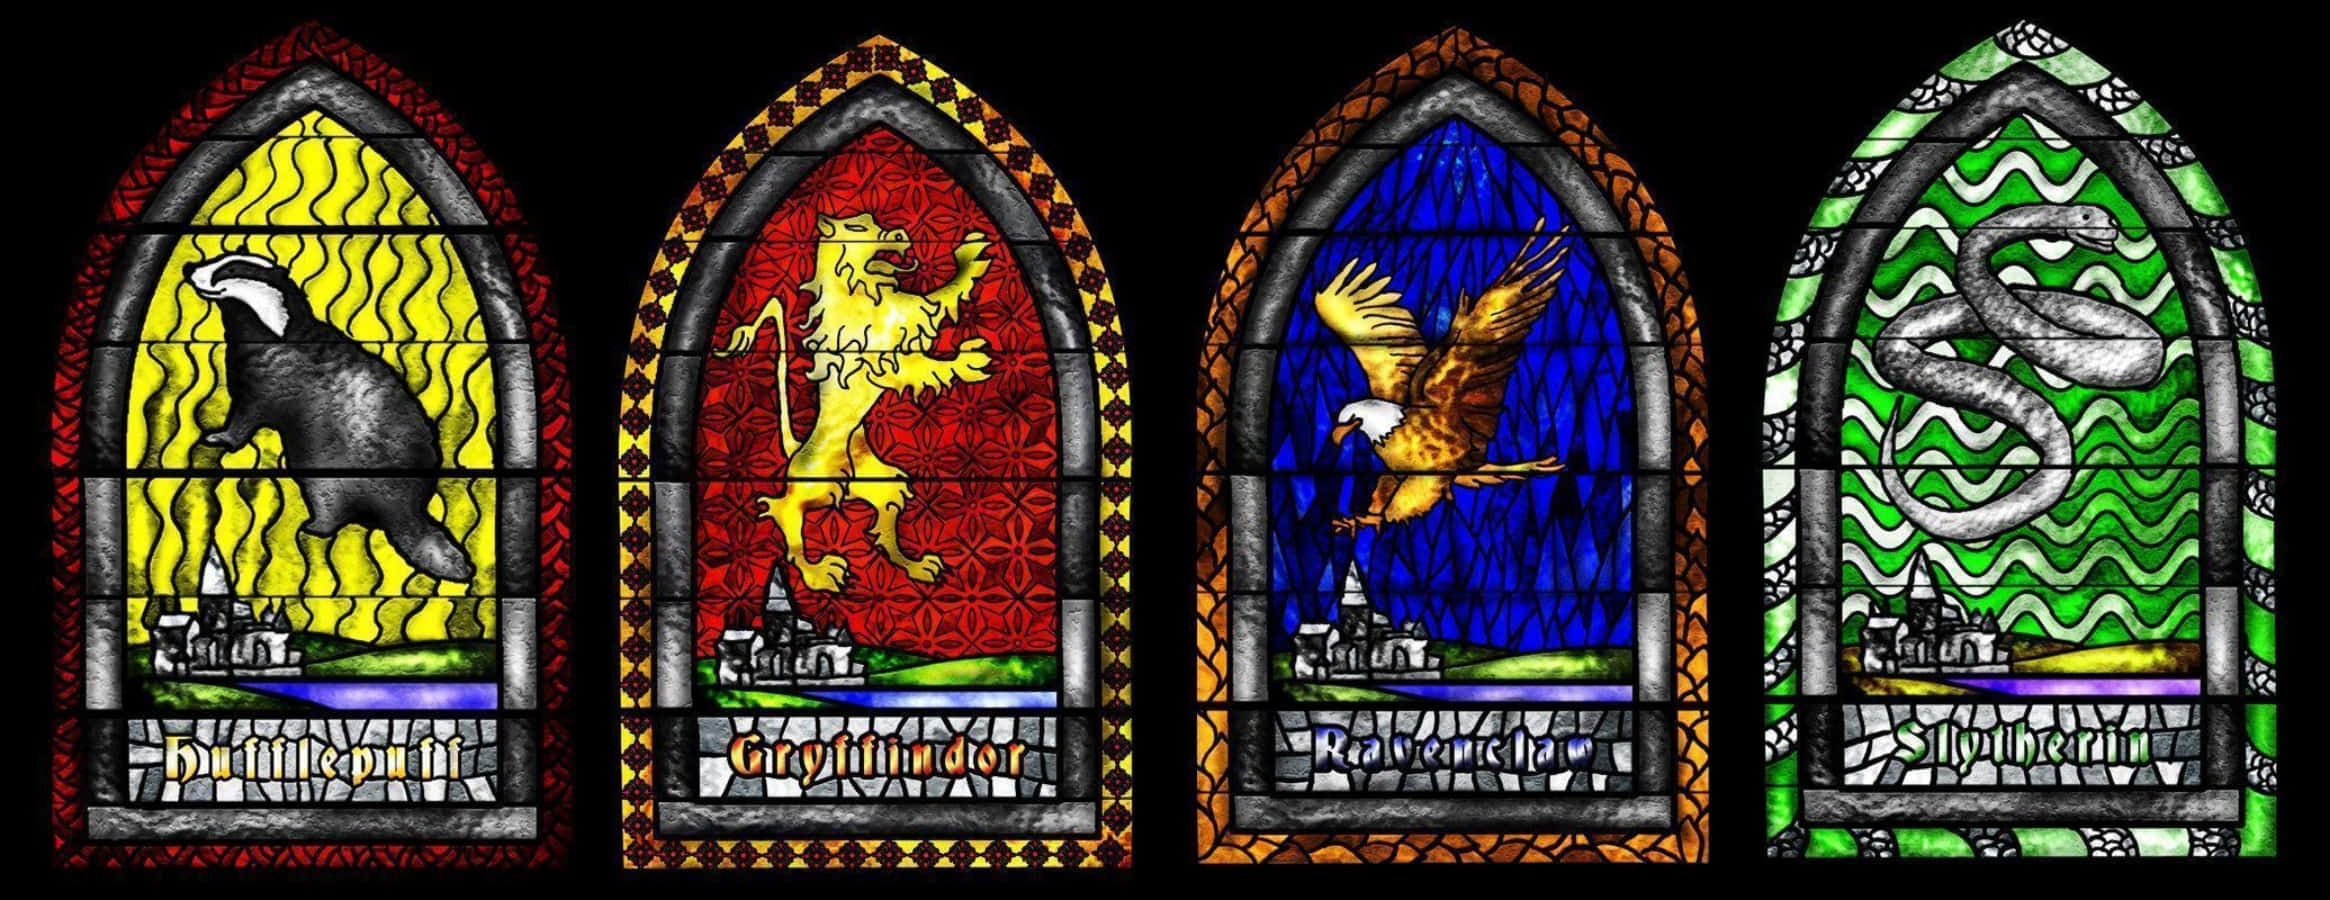 The Four Houses of Hogwarts Wallpaper